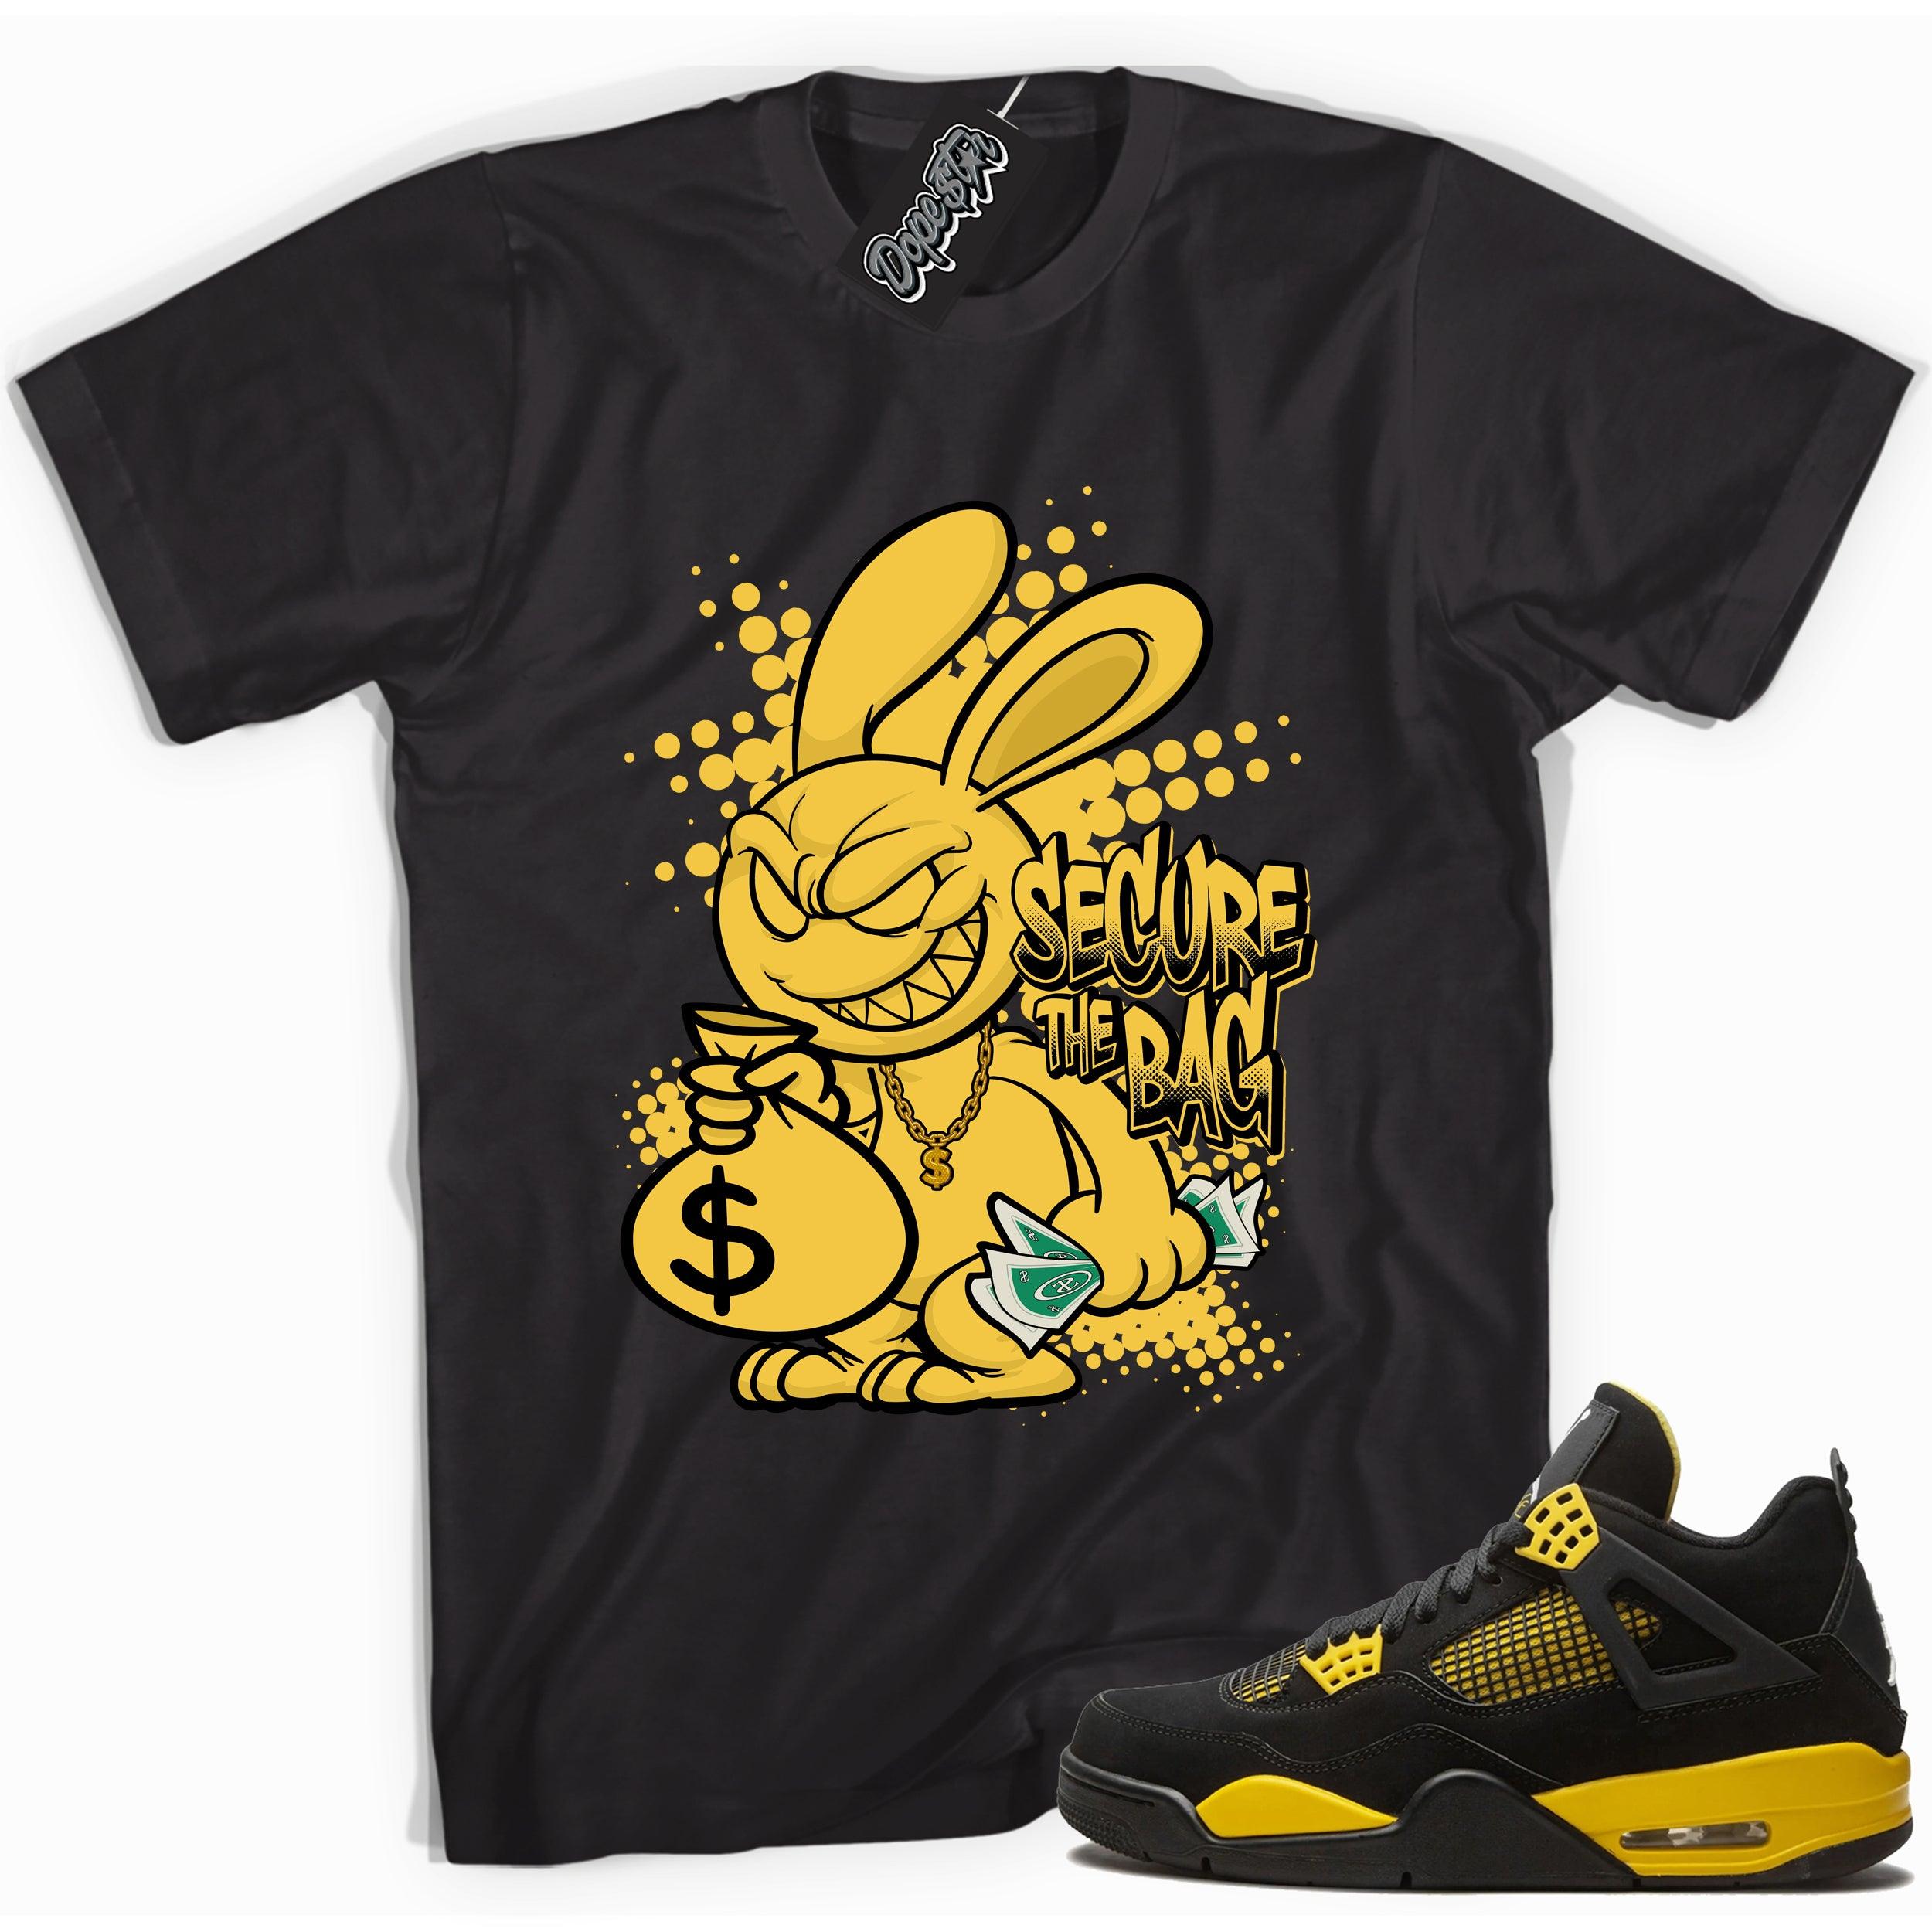 Cool black graphic tee with 'secure the bag' print, that perfectly matches  Air Jordan 4 Thunder sneakers